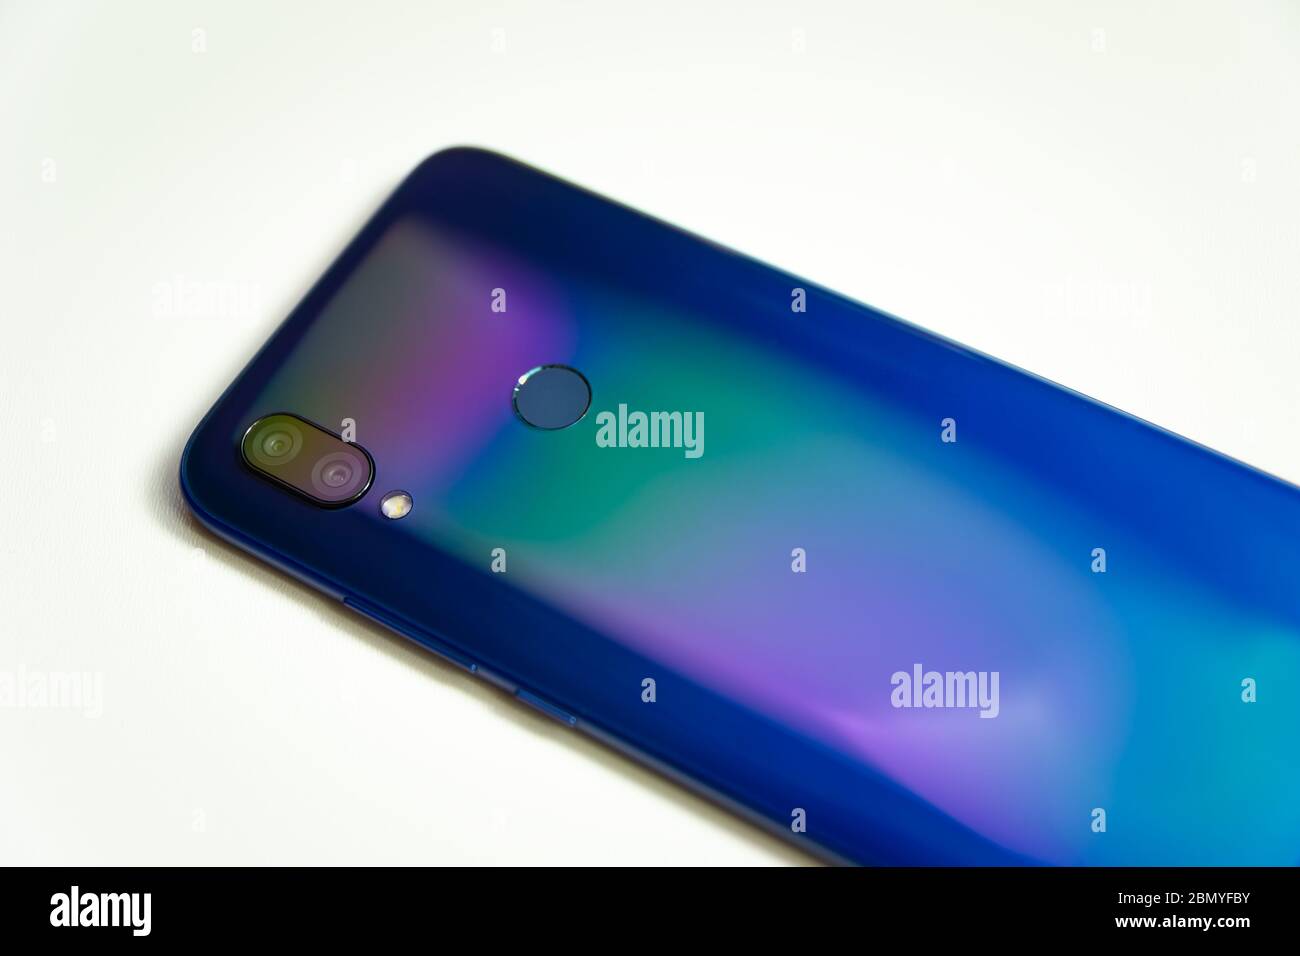 The back of a blue smartphone with two cameras and a flash, illuminated with colored light on a white background Stock Photo